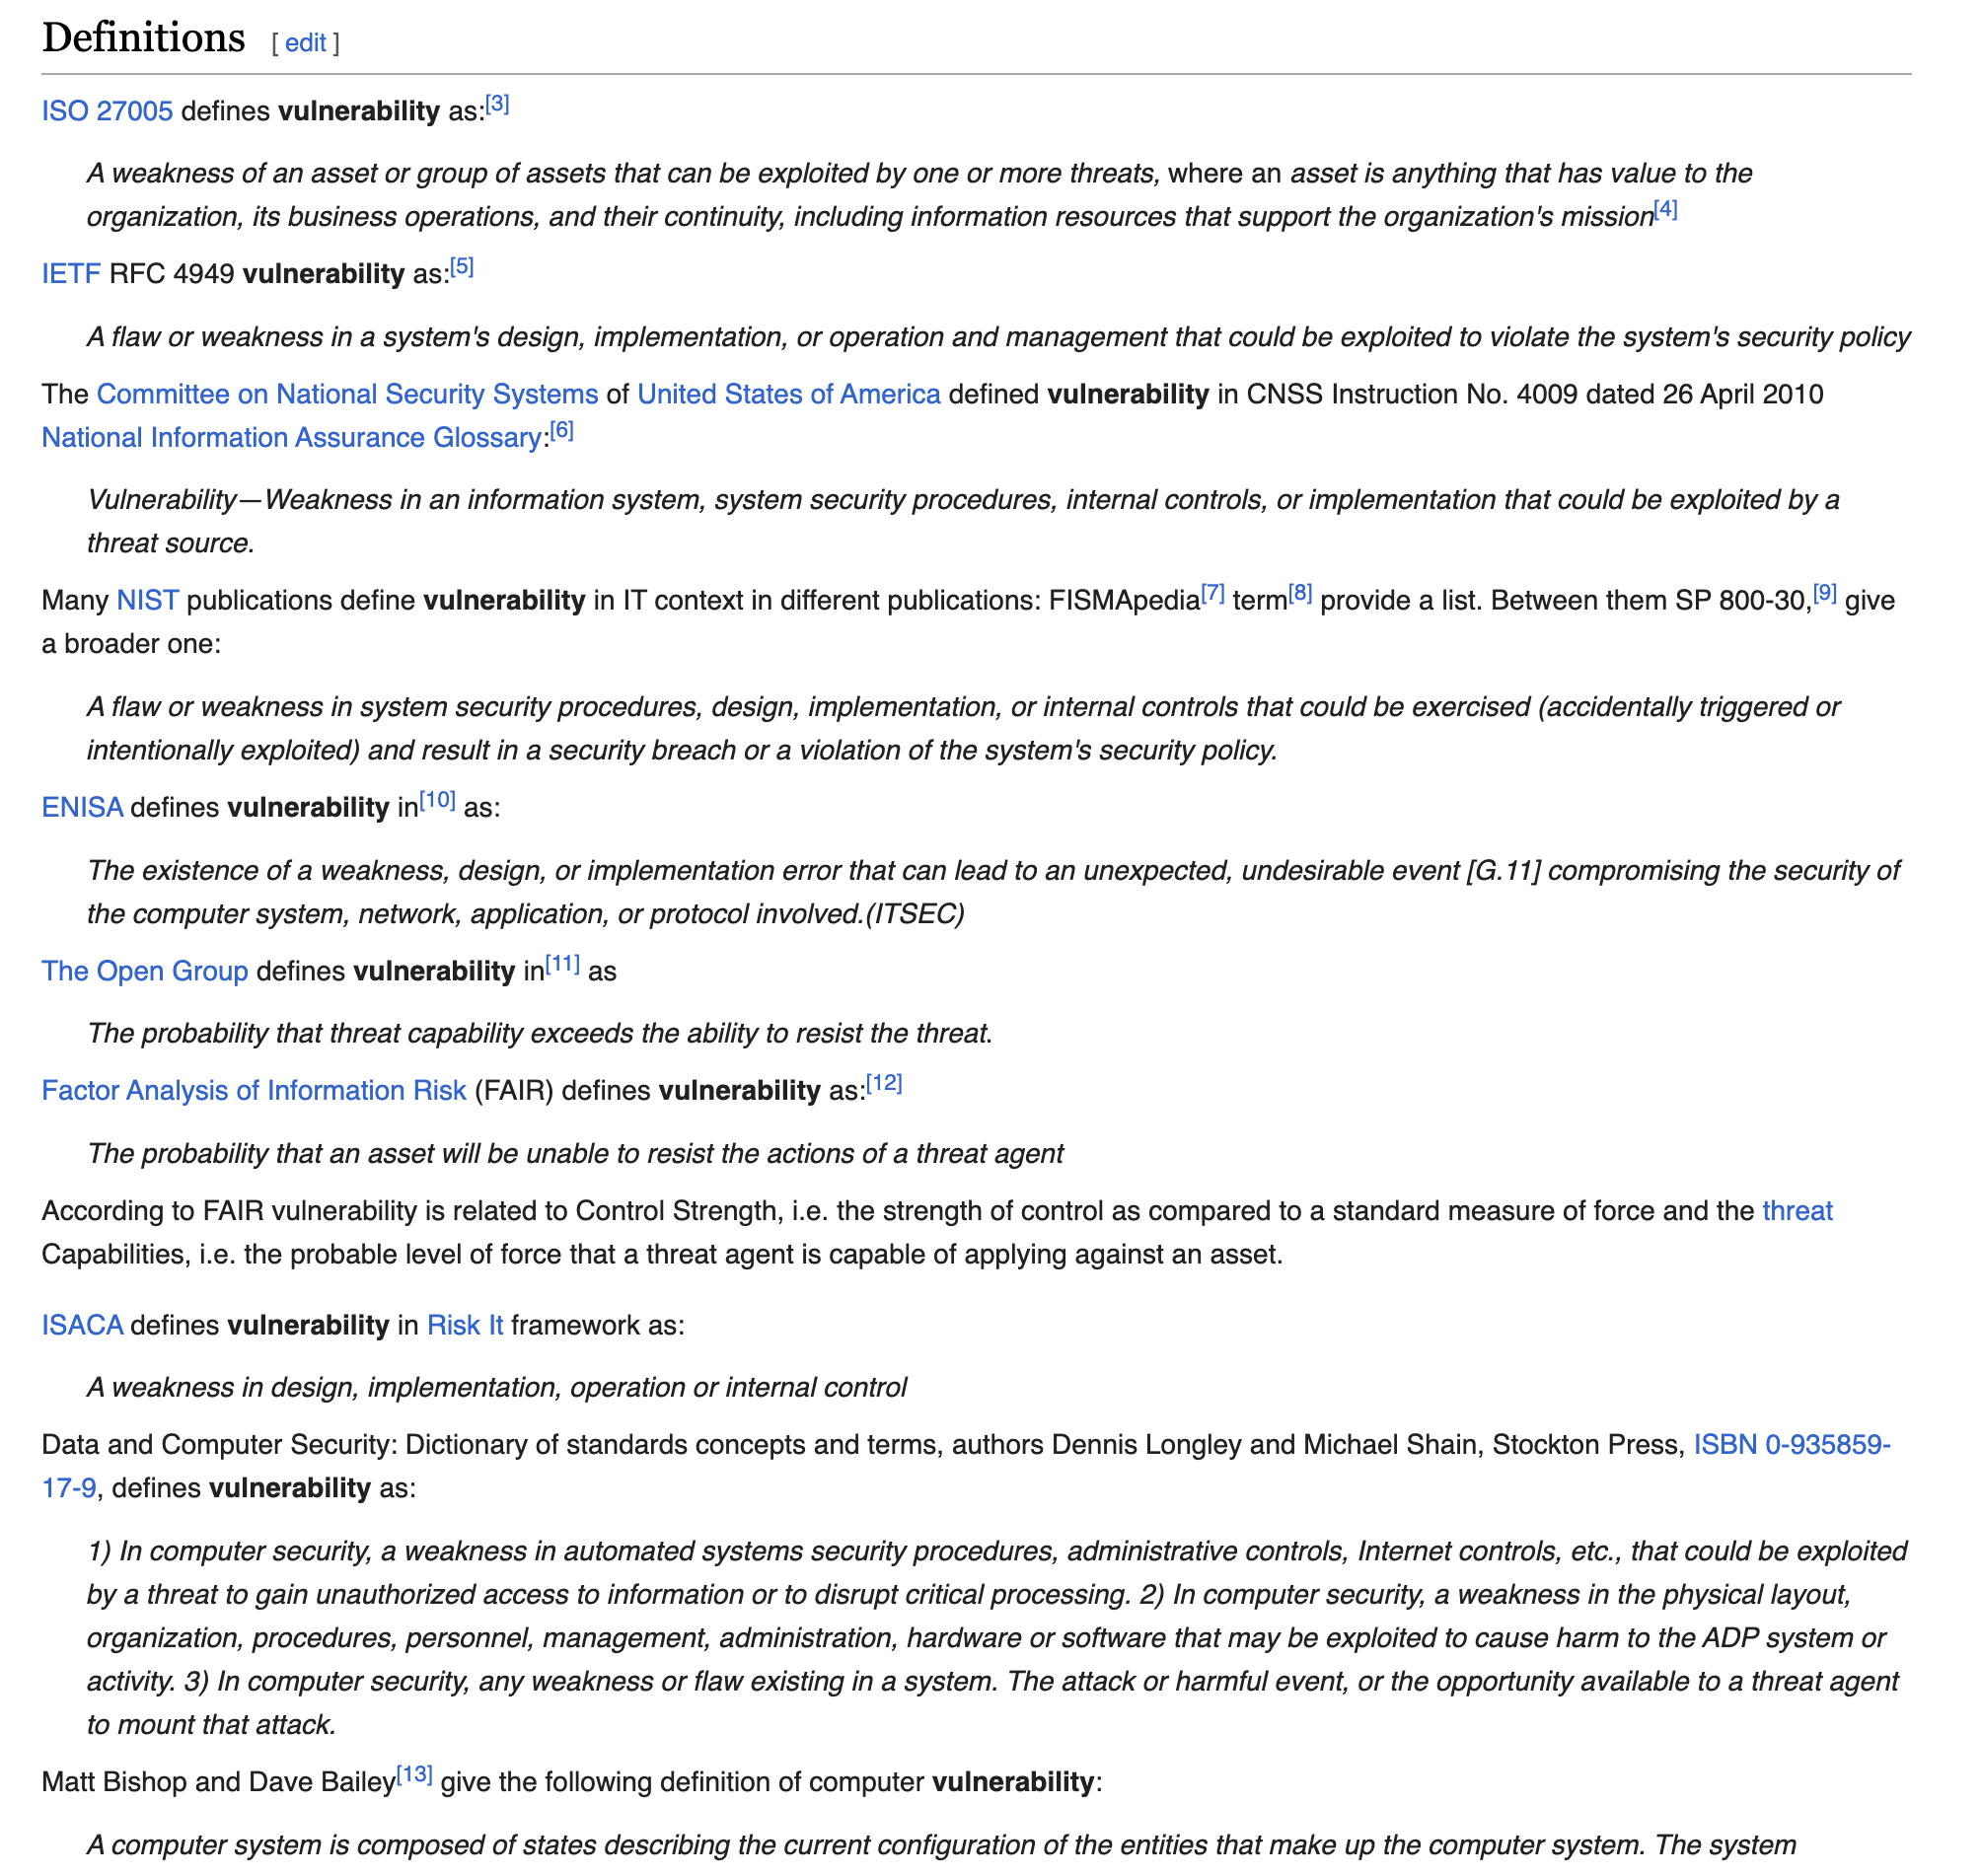 A screenshot of the wikipedia page listing different definitions of 'vulnerability' in the computing sense.